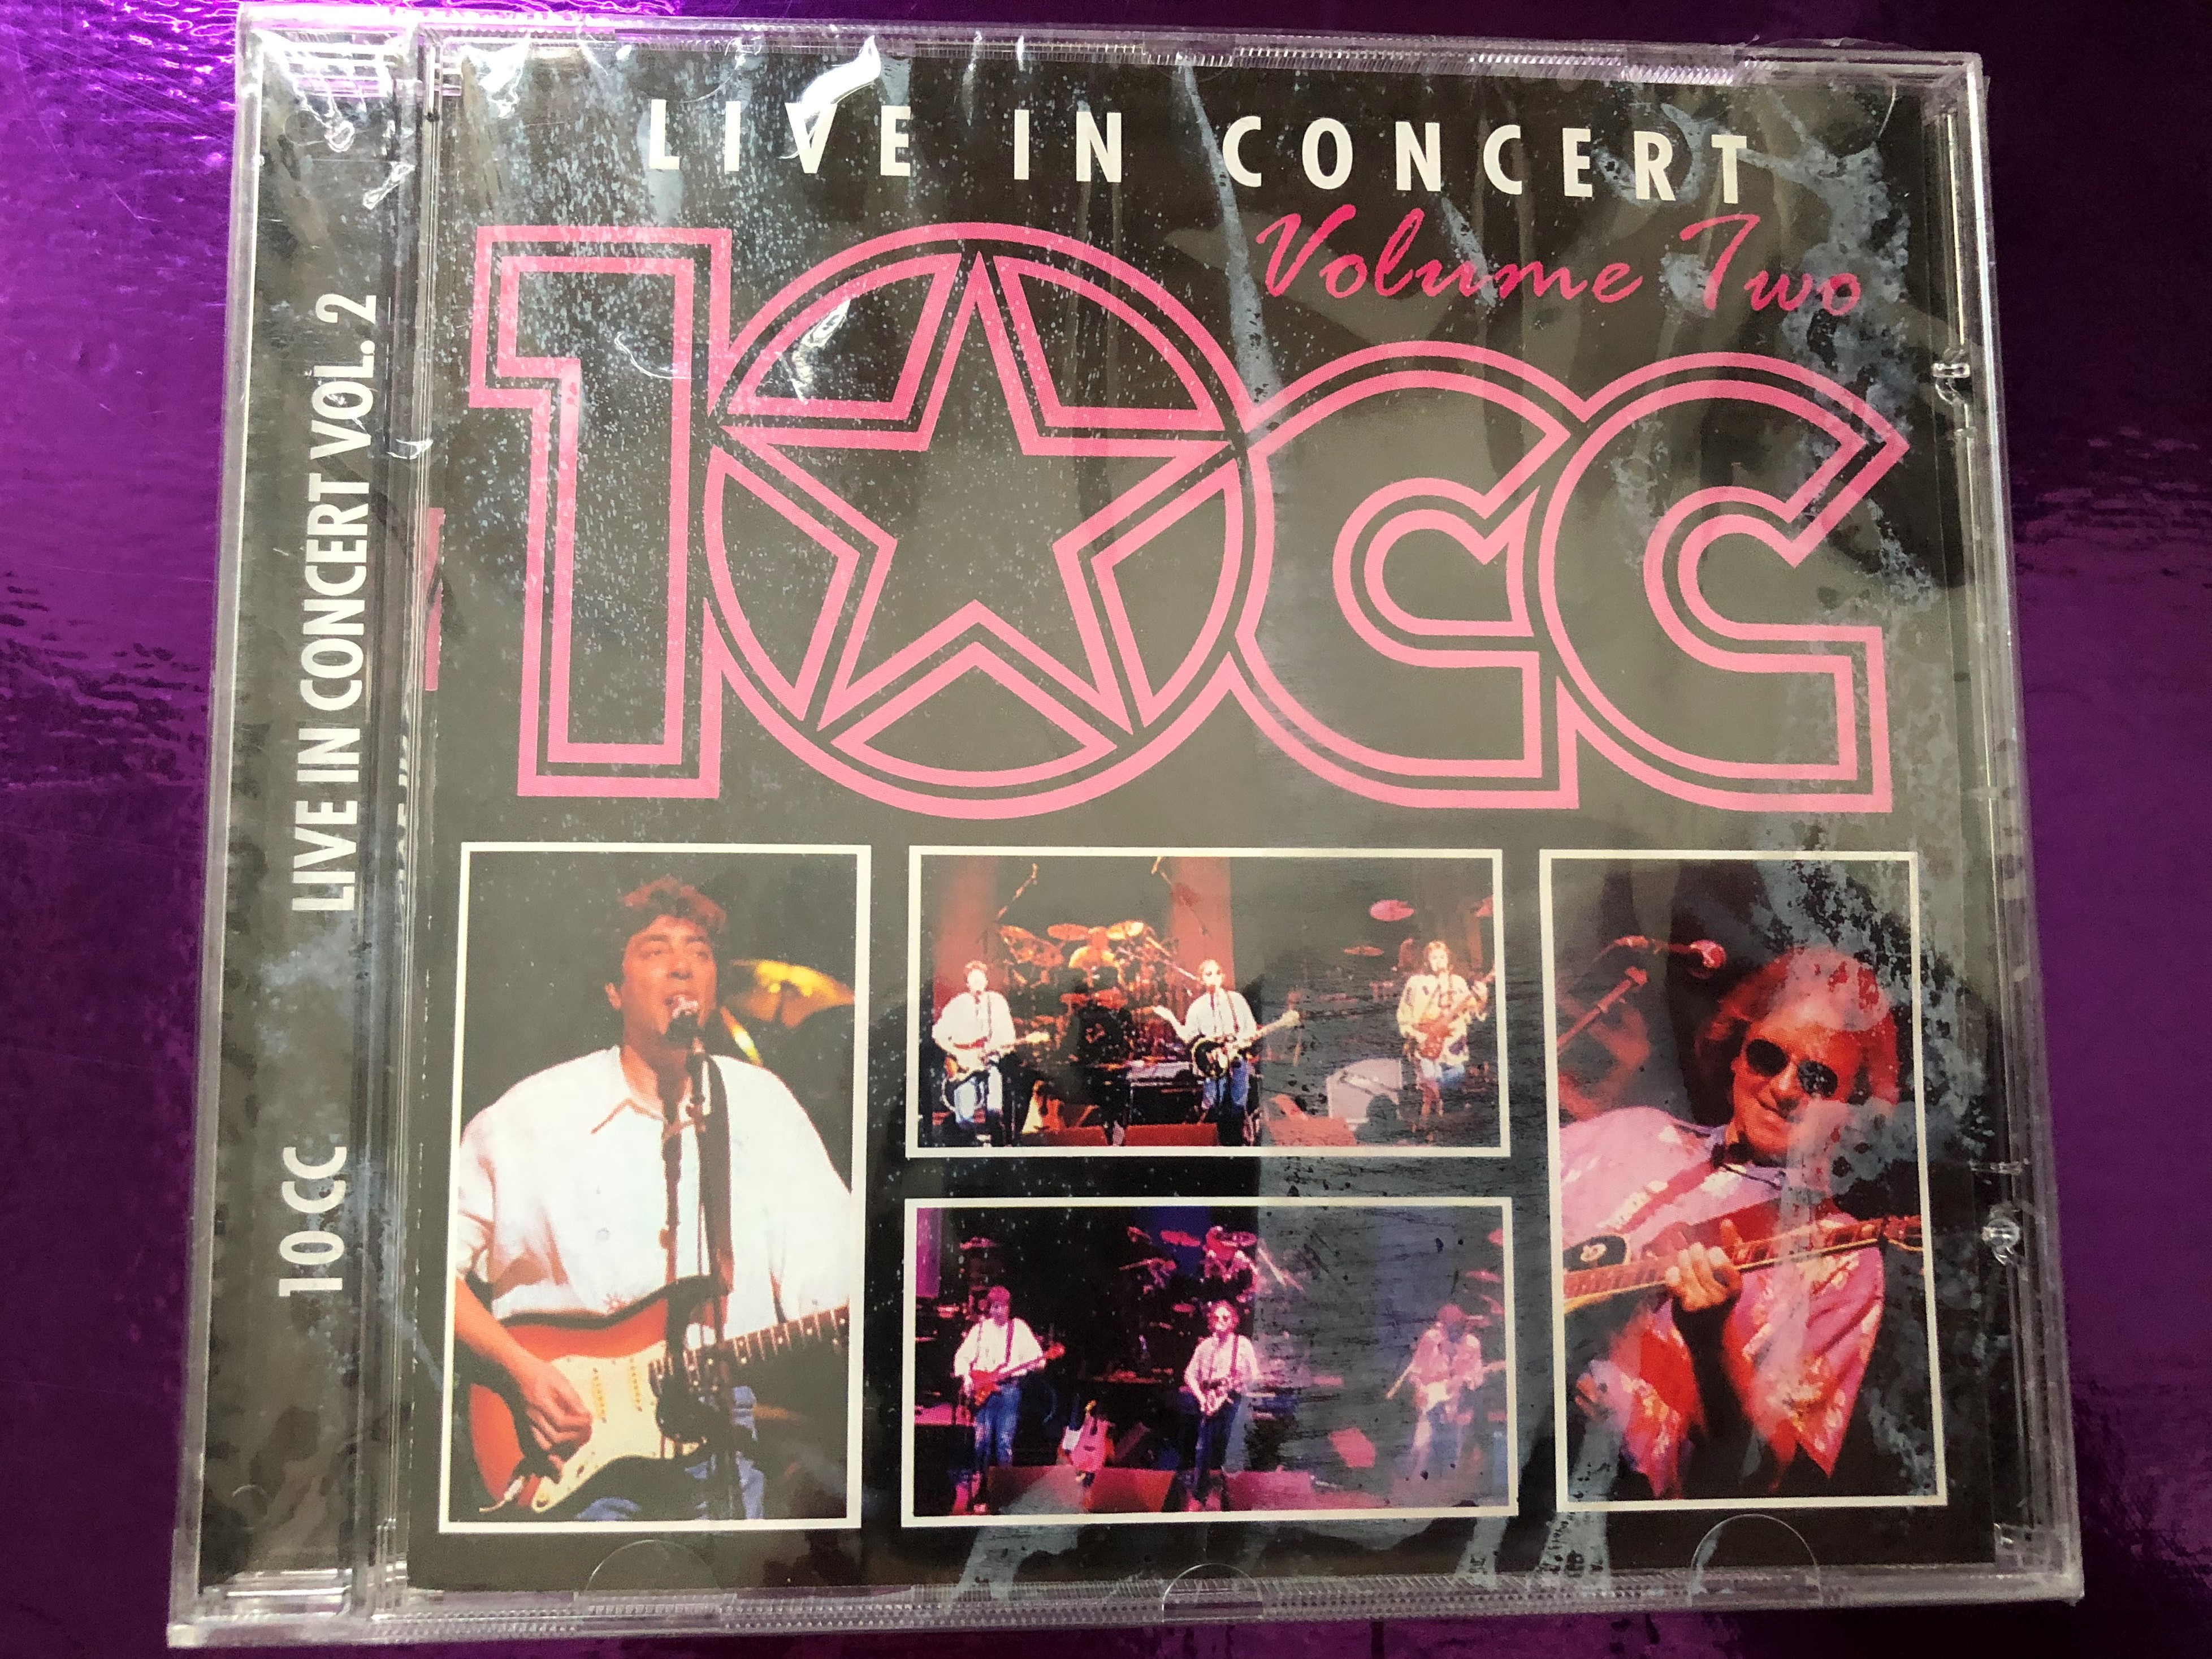 live-in-concert-volume-two-10cc-a-play-collection-audio-cd-1996-10002-2-1-.jpg